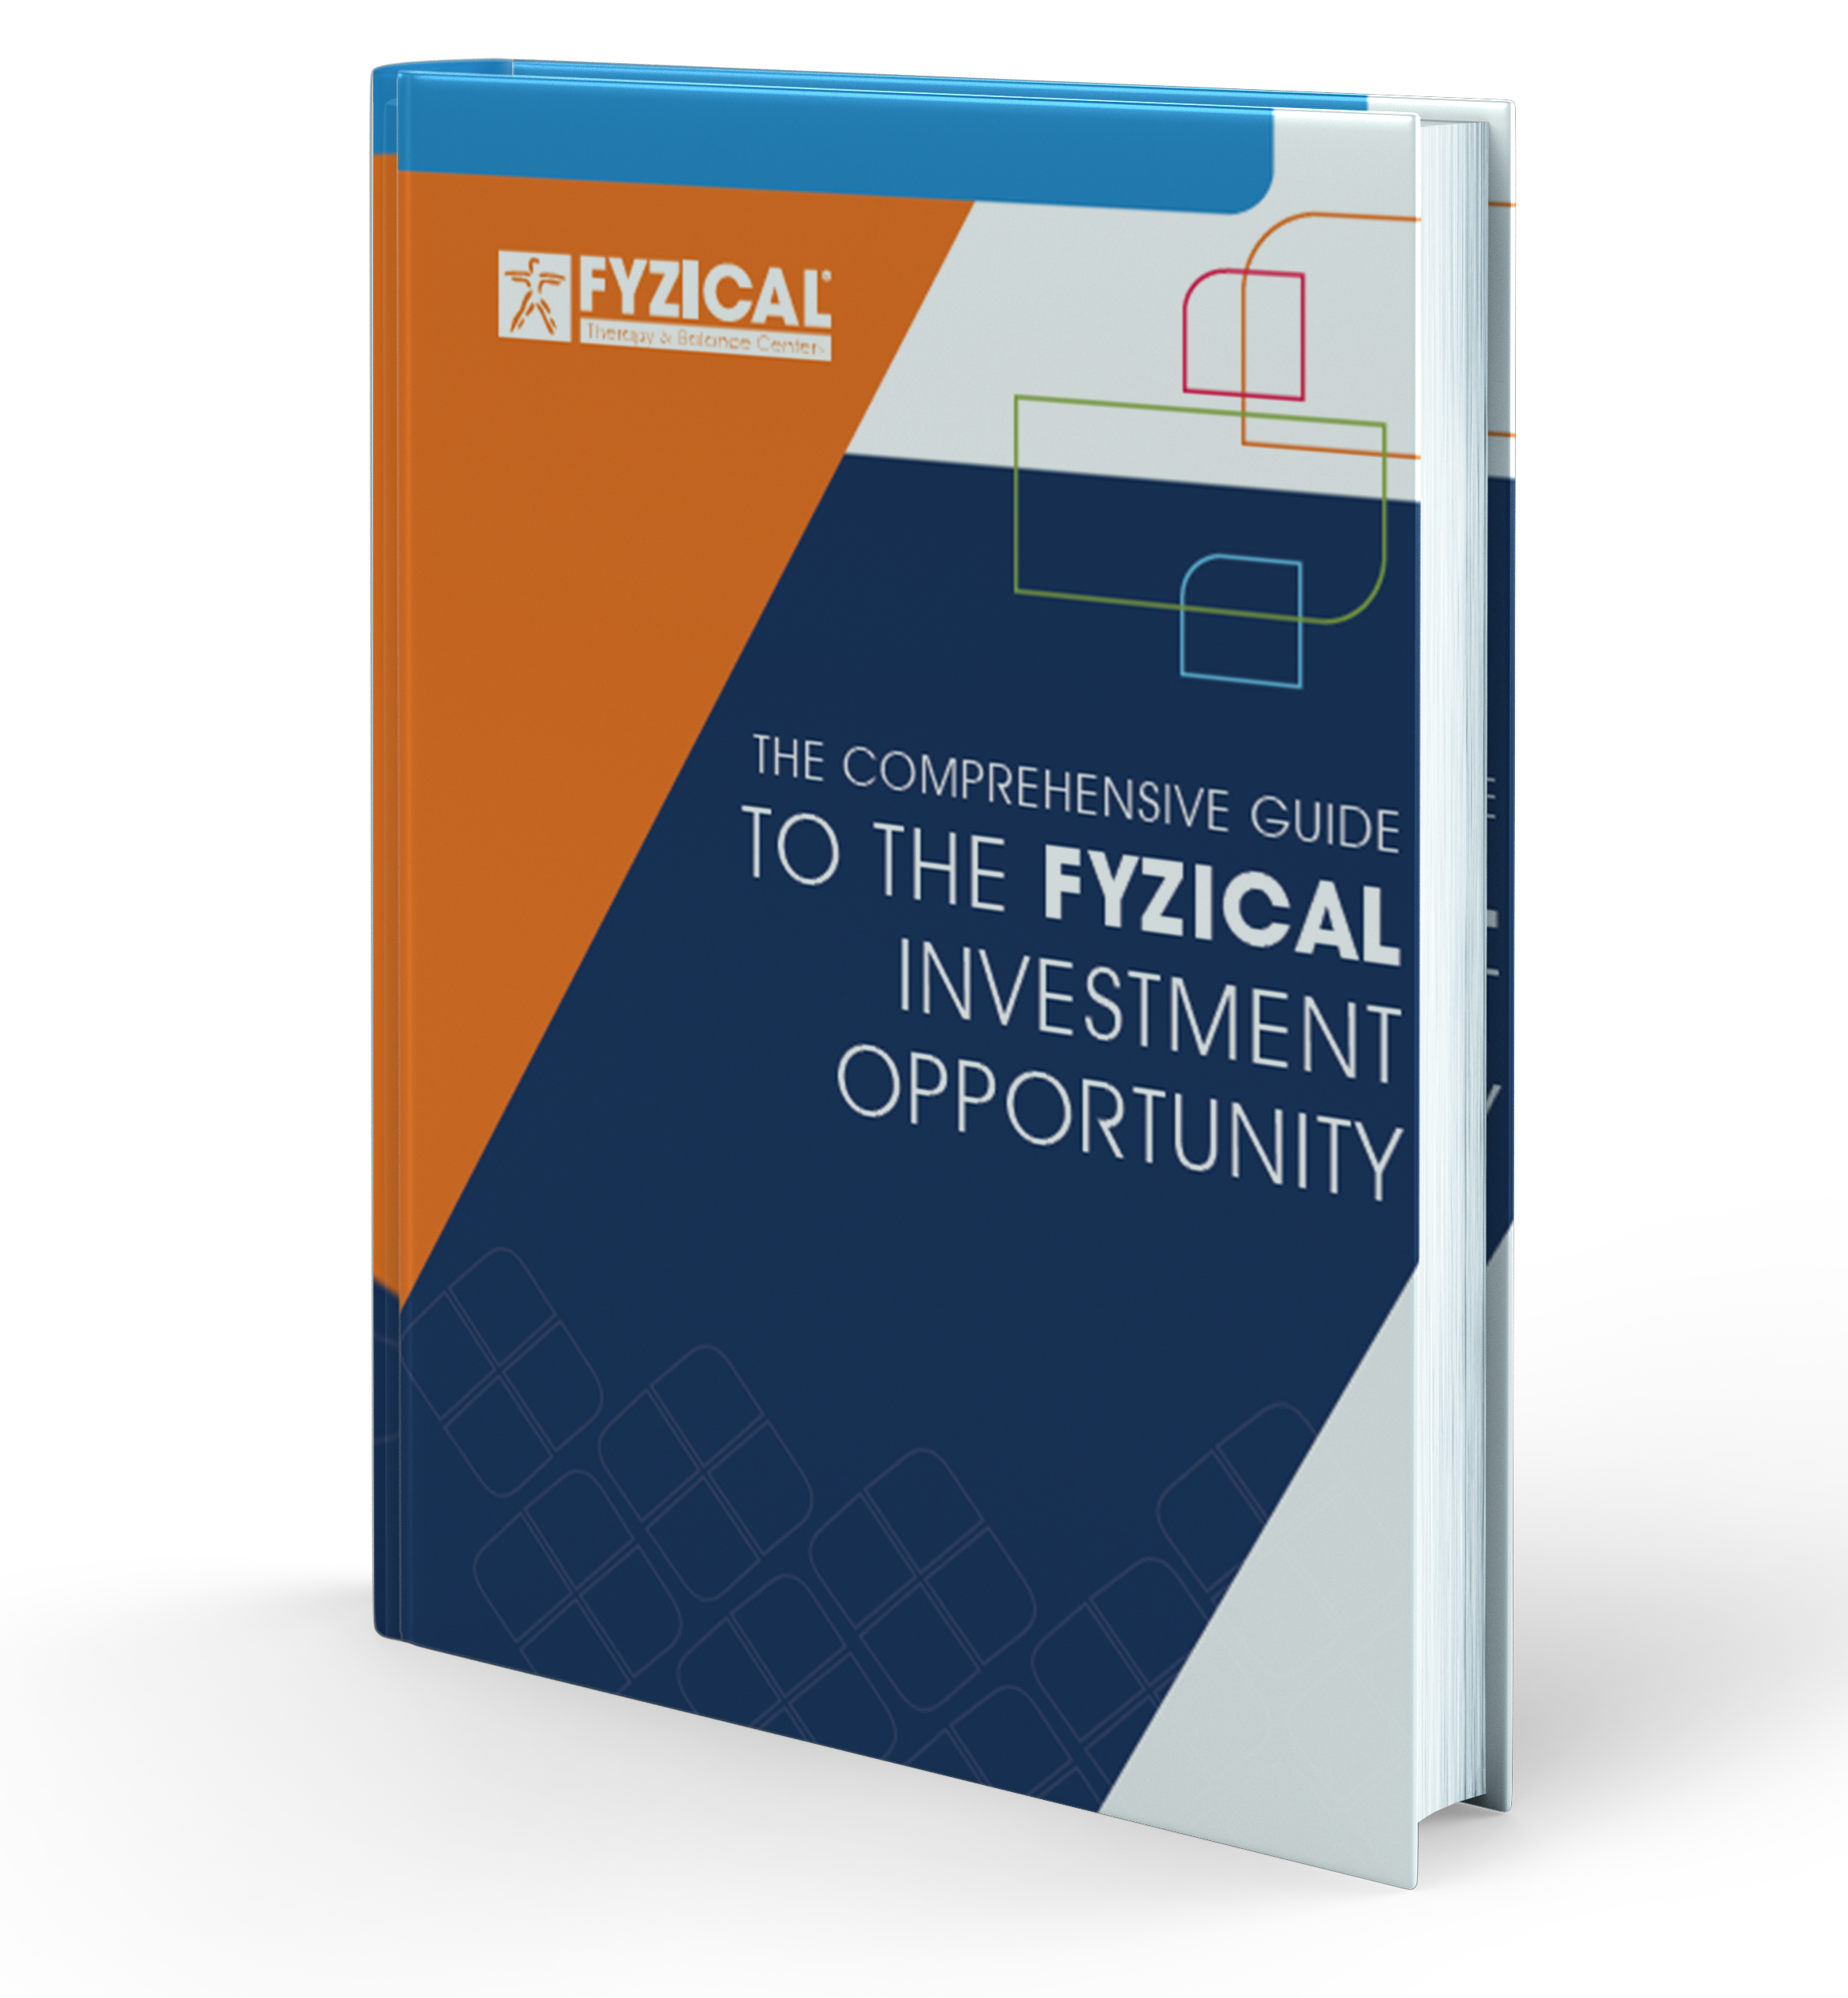 FYZICAL Investment Opportunity Guide